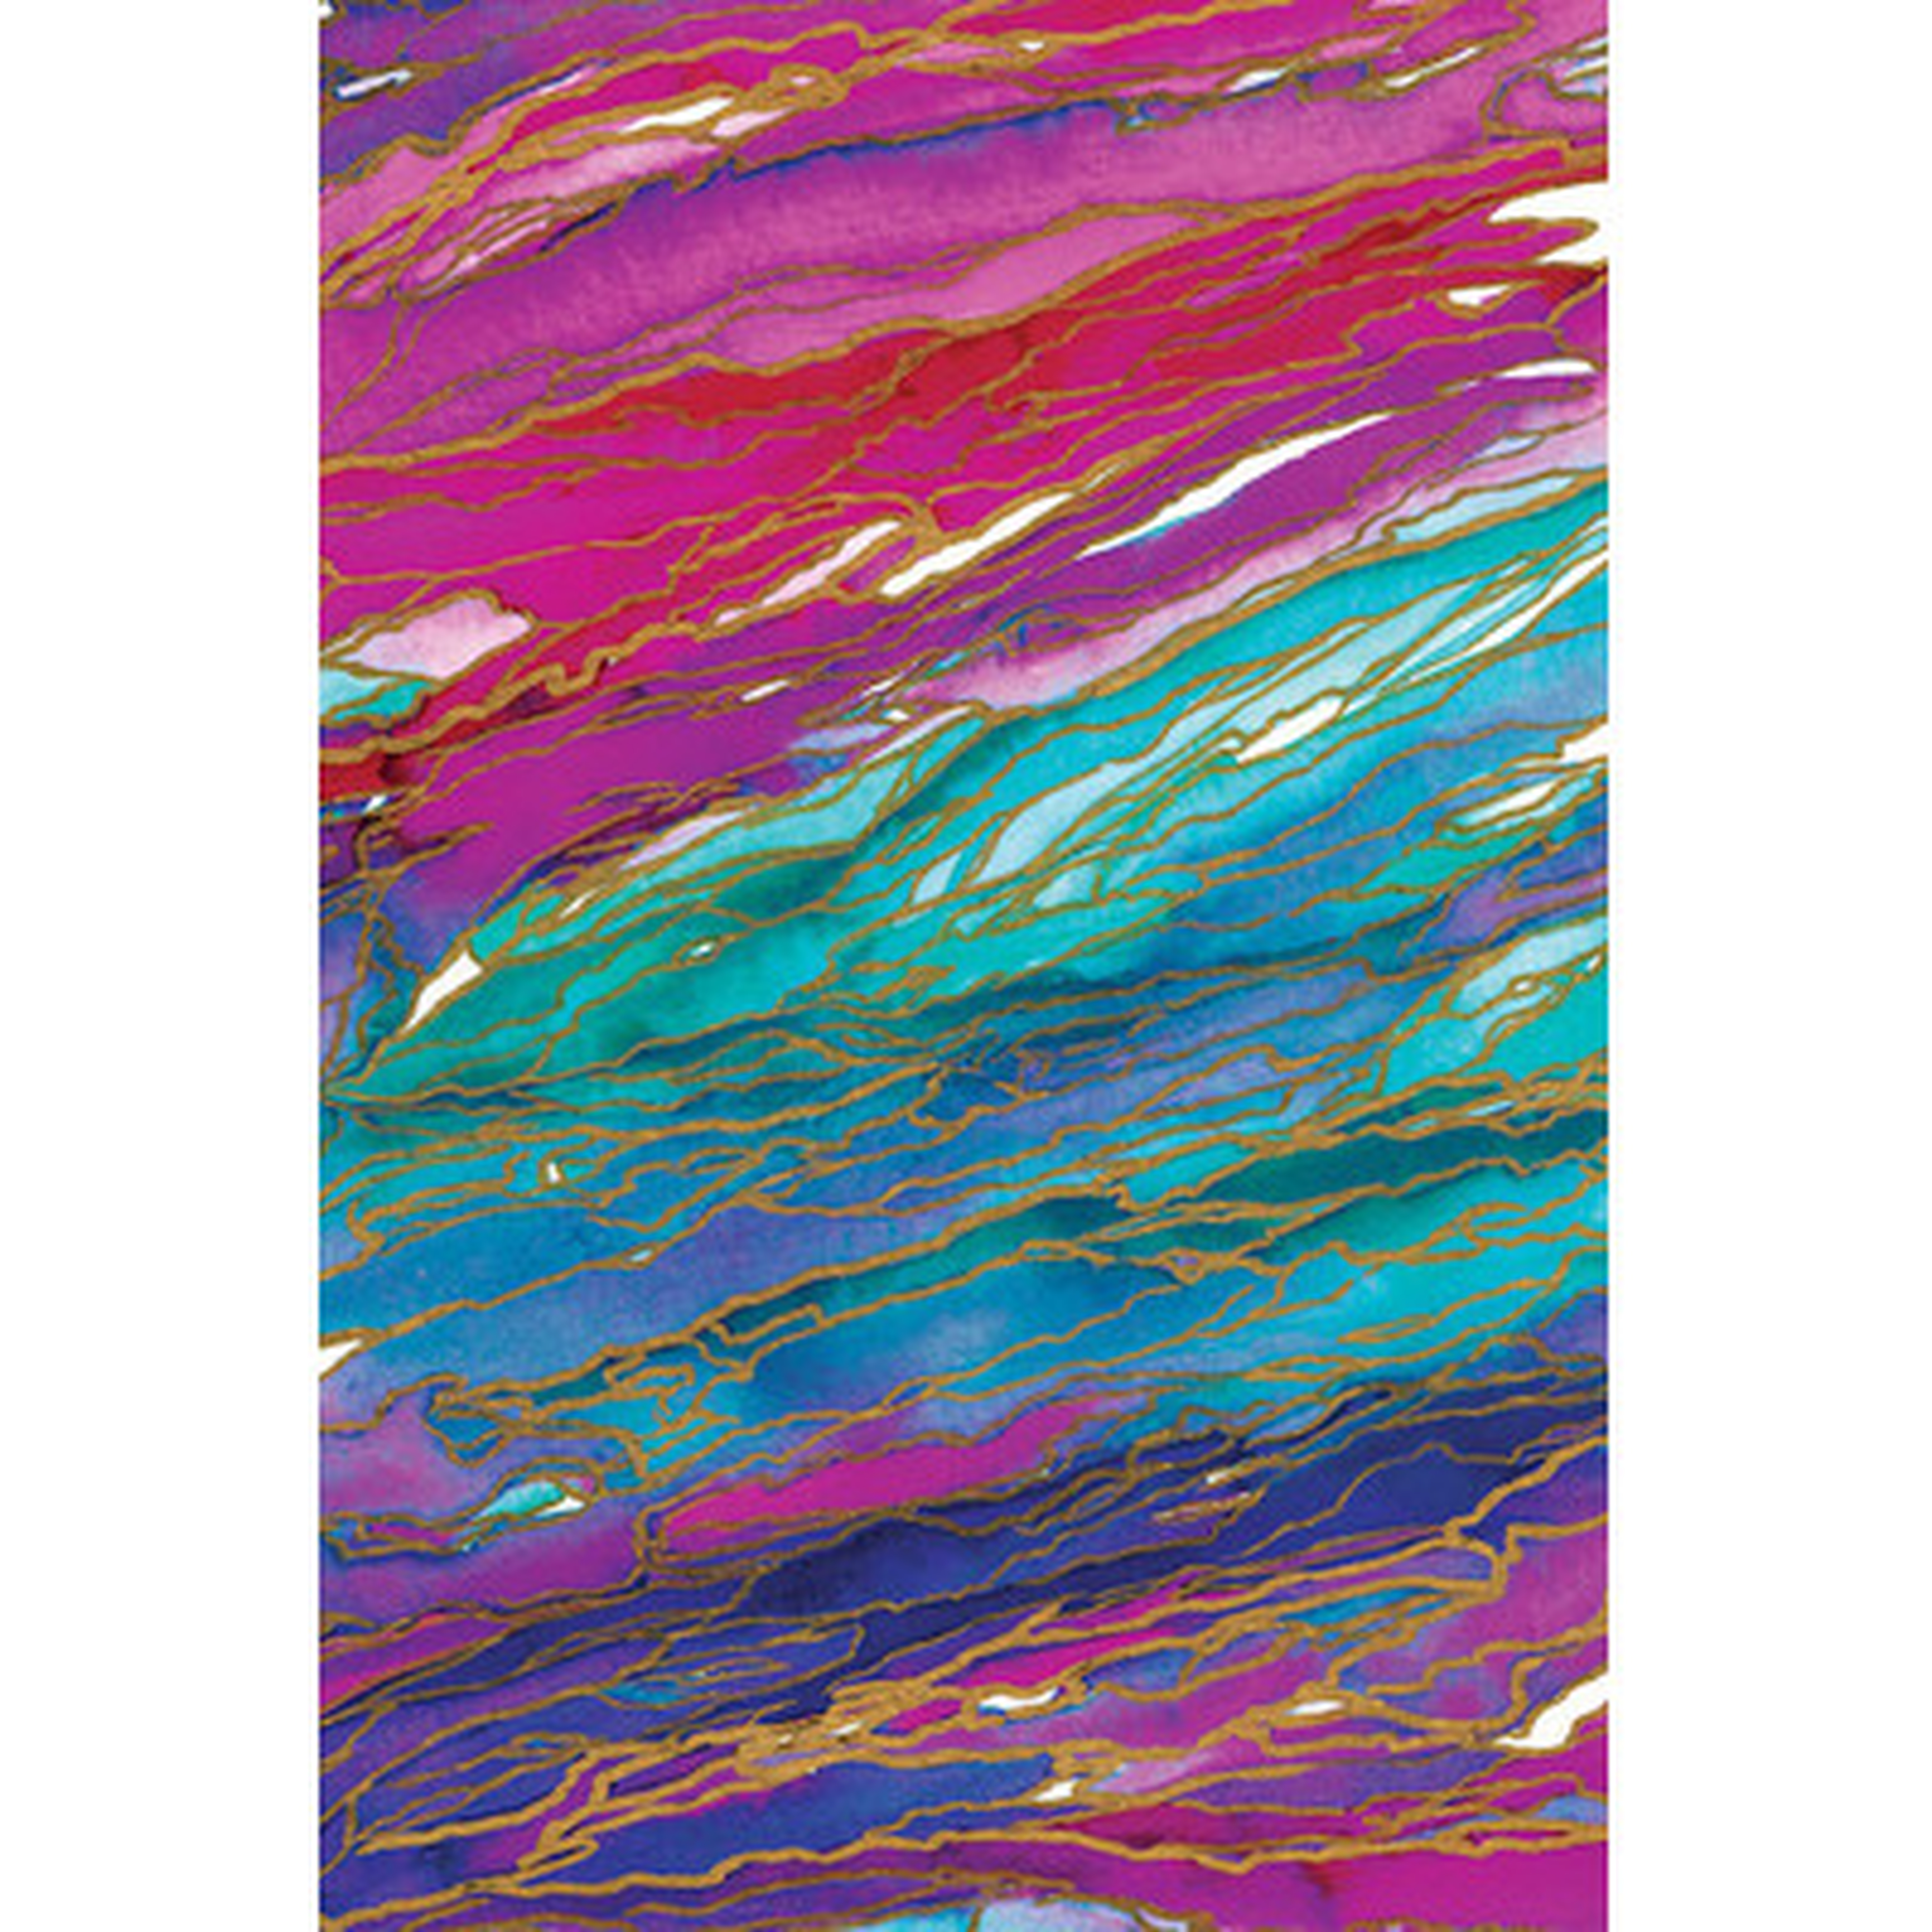 Agate Magic - Miami Summer Painting Print on Wrapped Canvas - Wayfair